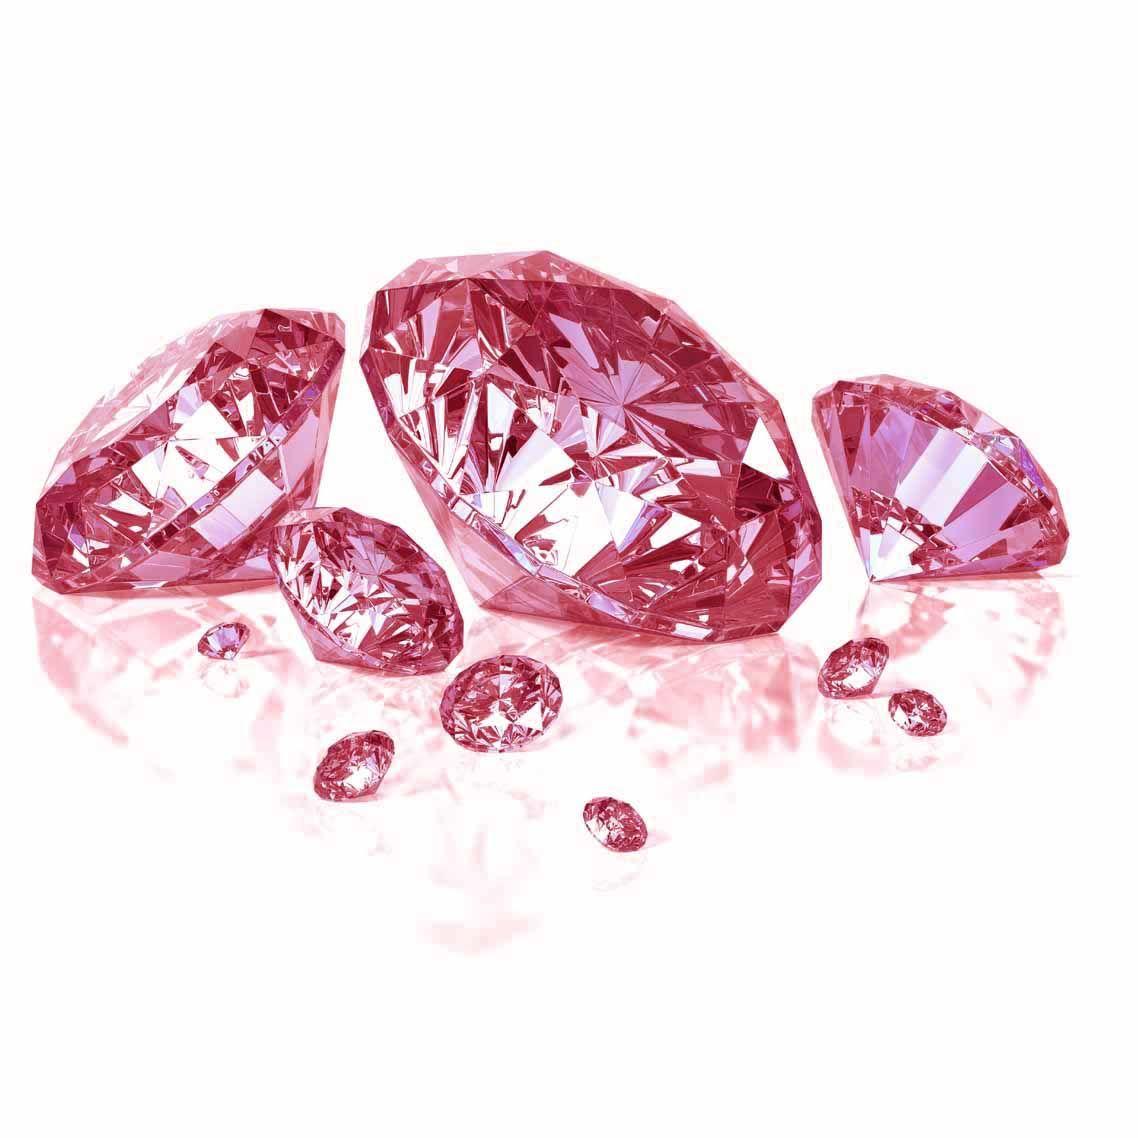 Pink Diamonds Logo - Shout Out To All My Diamonds! Ladies Live Your Worth ...